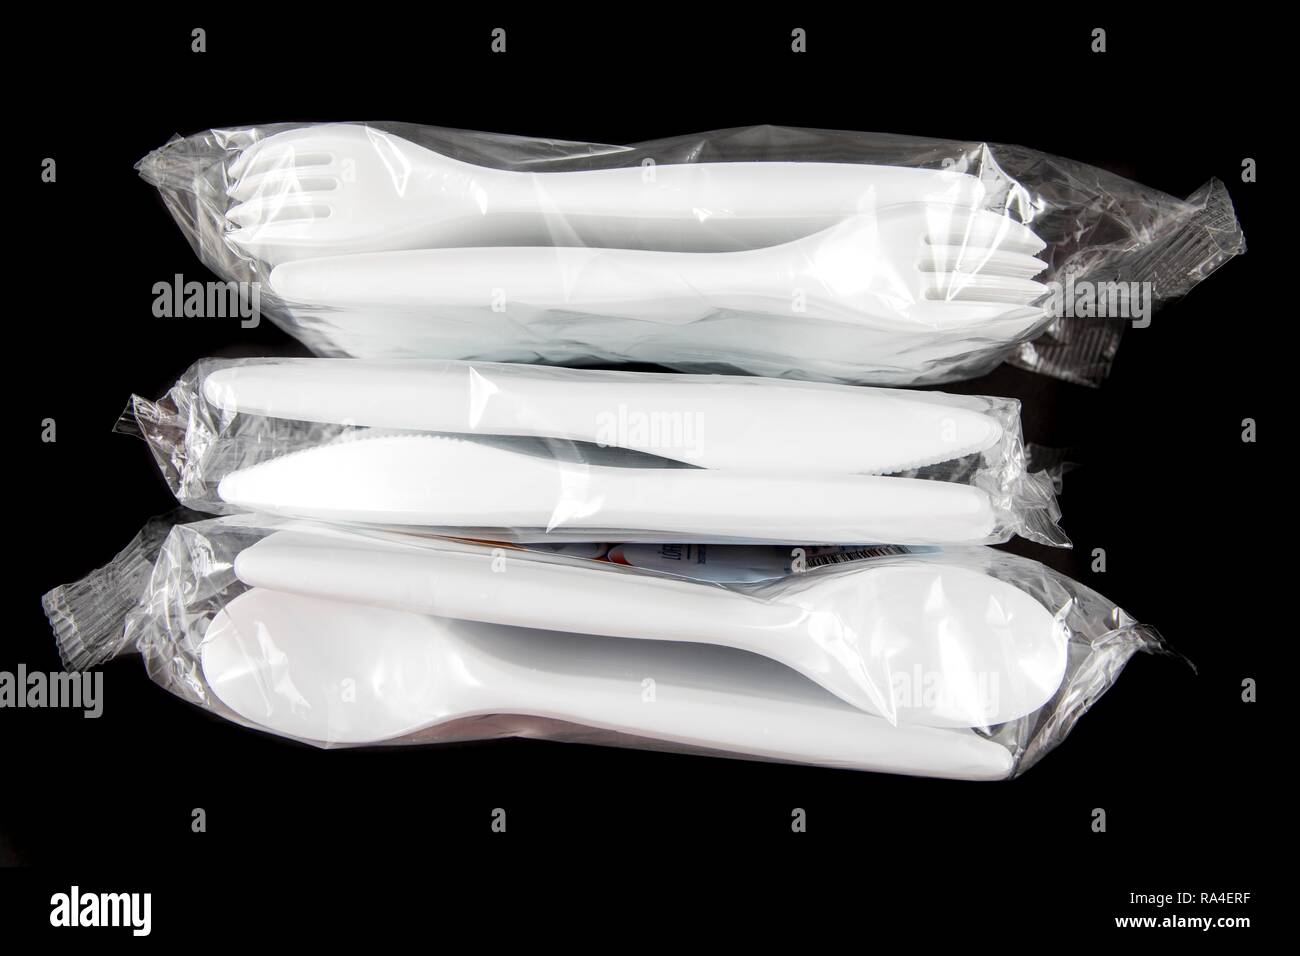 Large pack of plastic cutlery, disposable cutlery, knives, forks, spoons, plastic waste Stock Photo